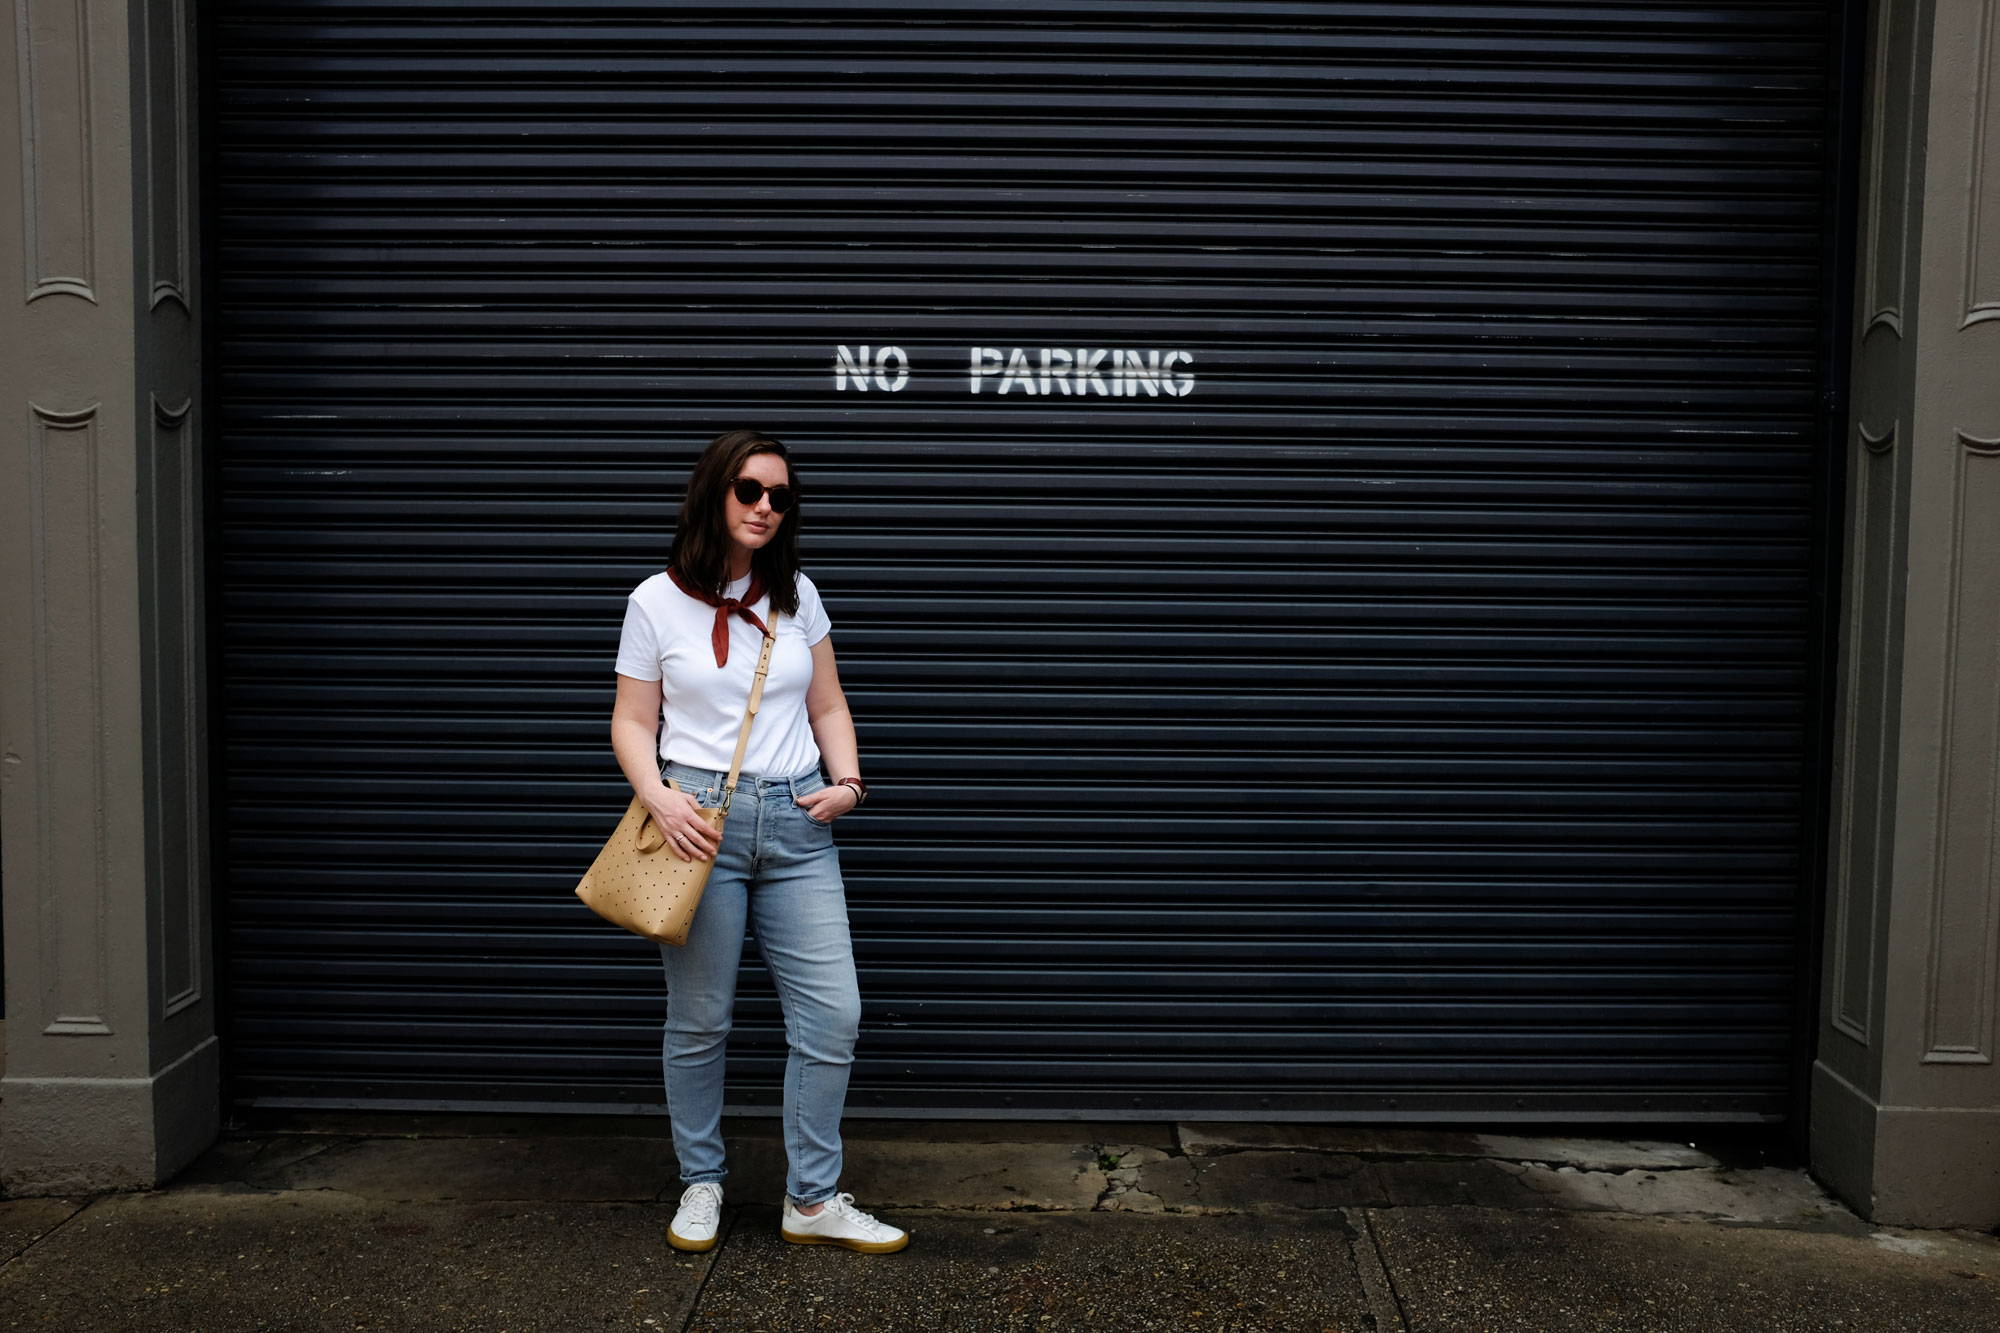 Krystal standing in front of a sign that says No Parking